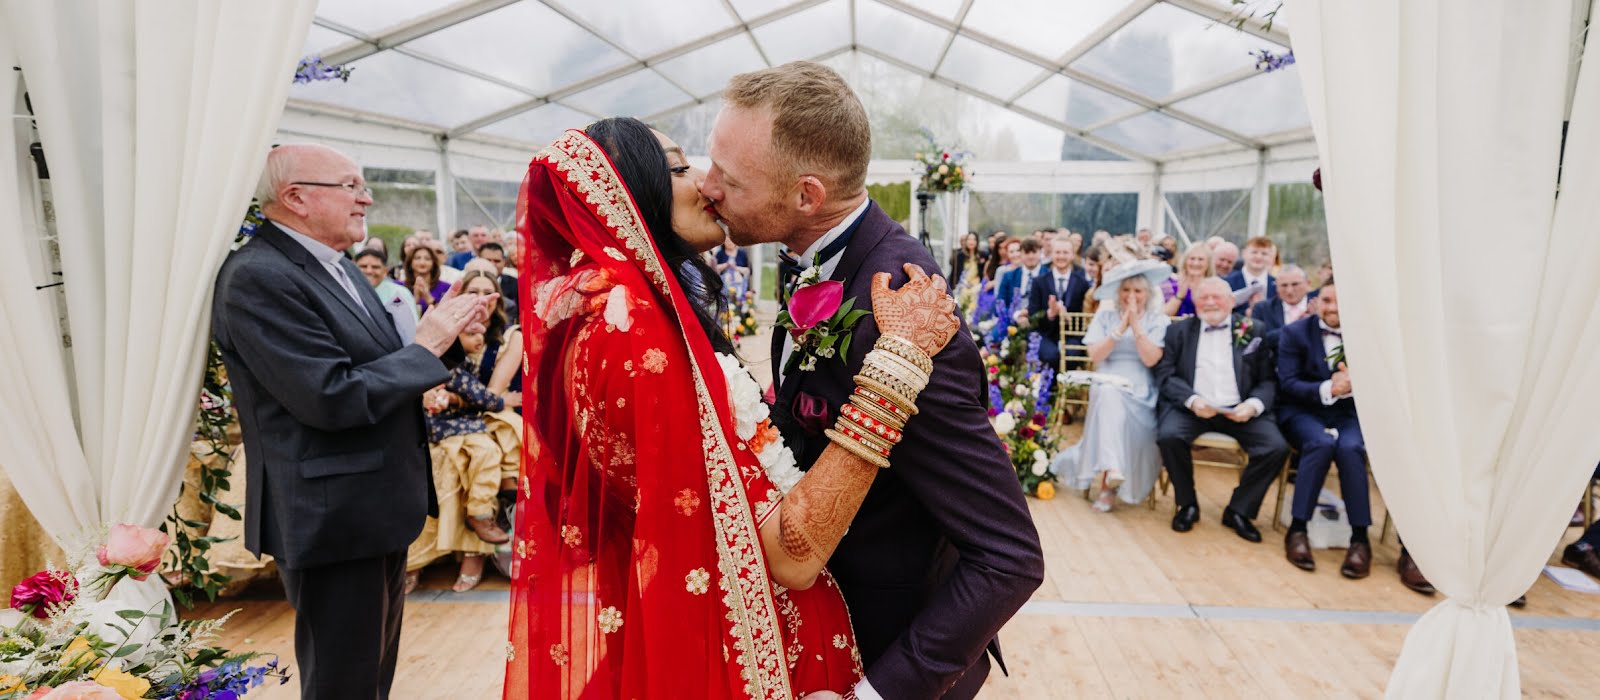 Real Weddings: Radhé and Anthony’s Indian-Irish wedding in Co Kildare